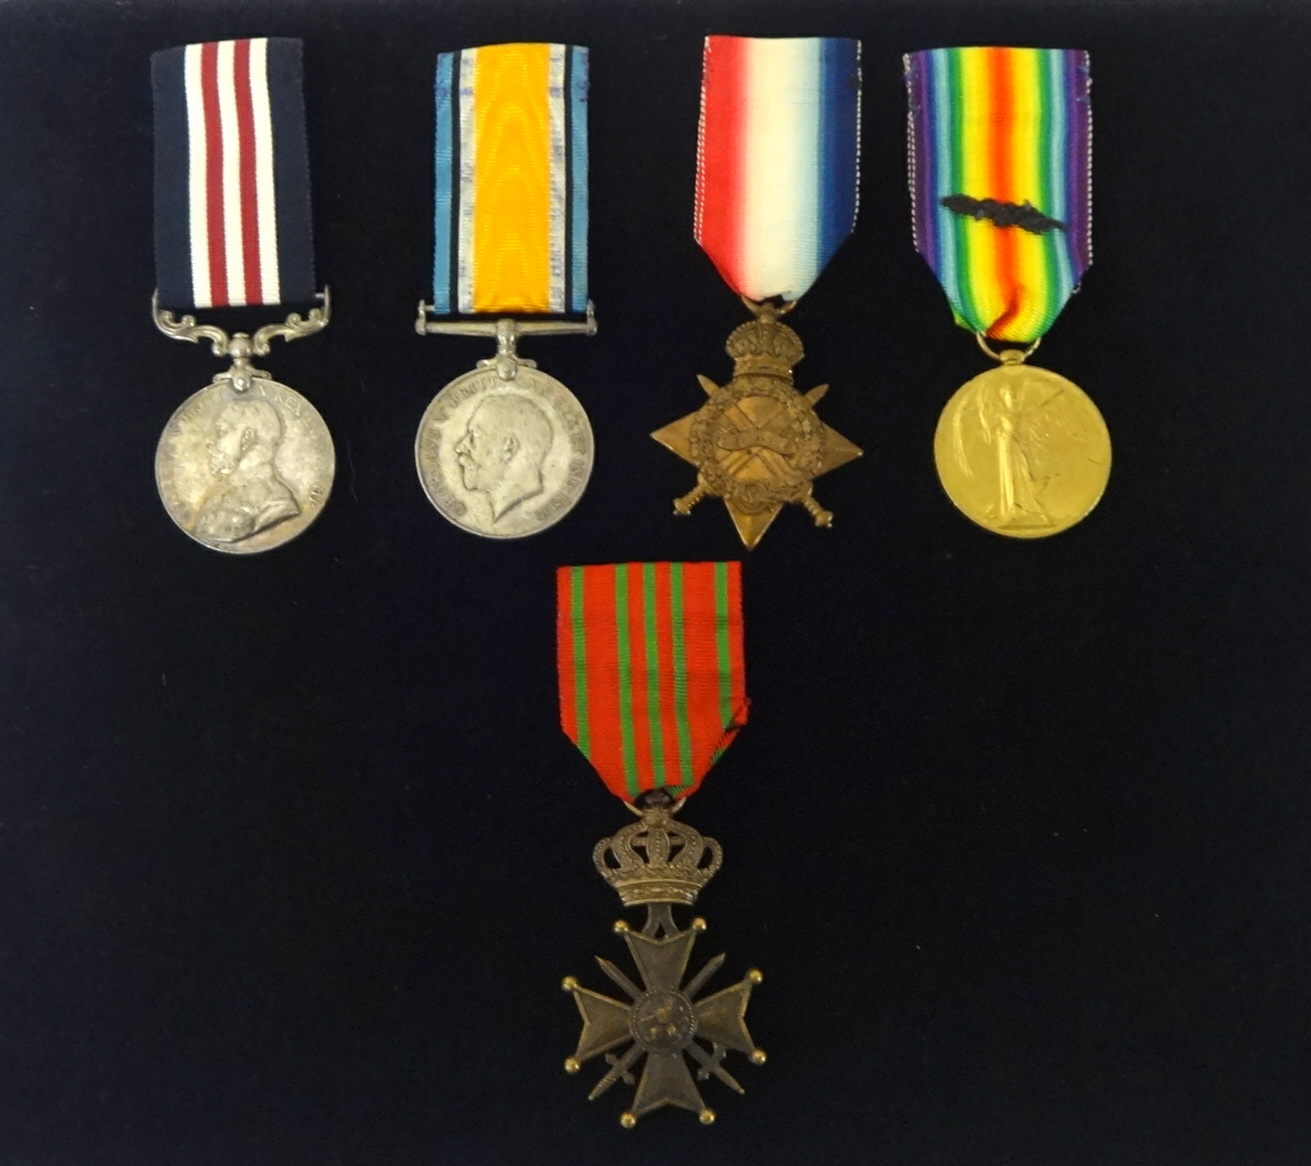 Five Great War Medals including the Military Medal (MM) awarded to SGT. A. (Arthur) BOUGHTON 1/ - Image 2 of 6